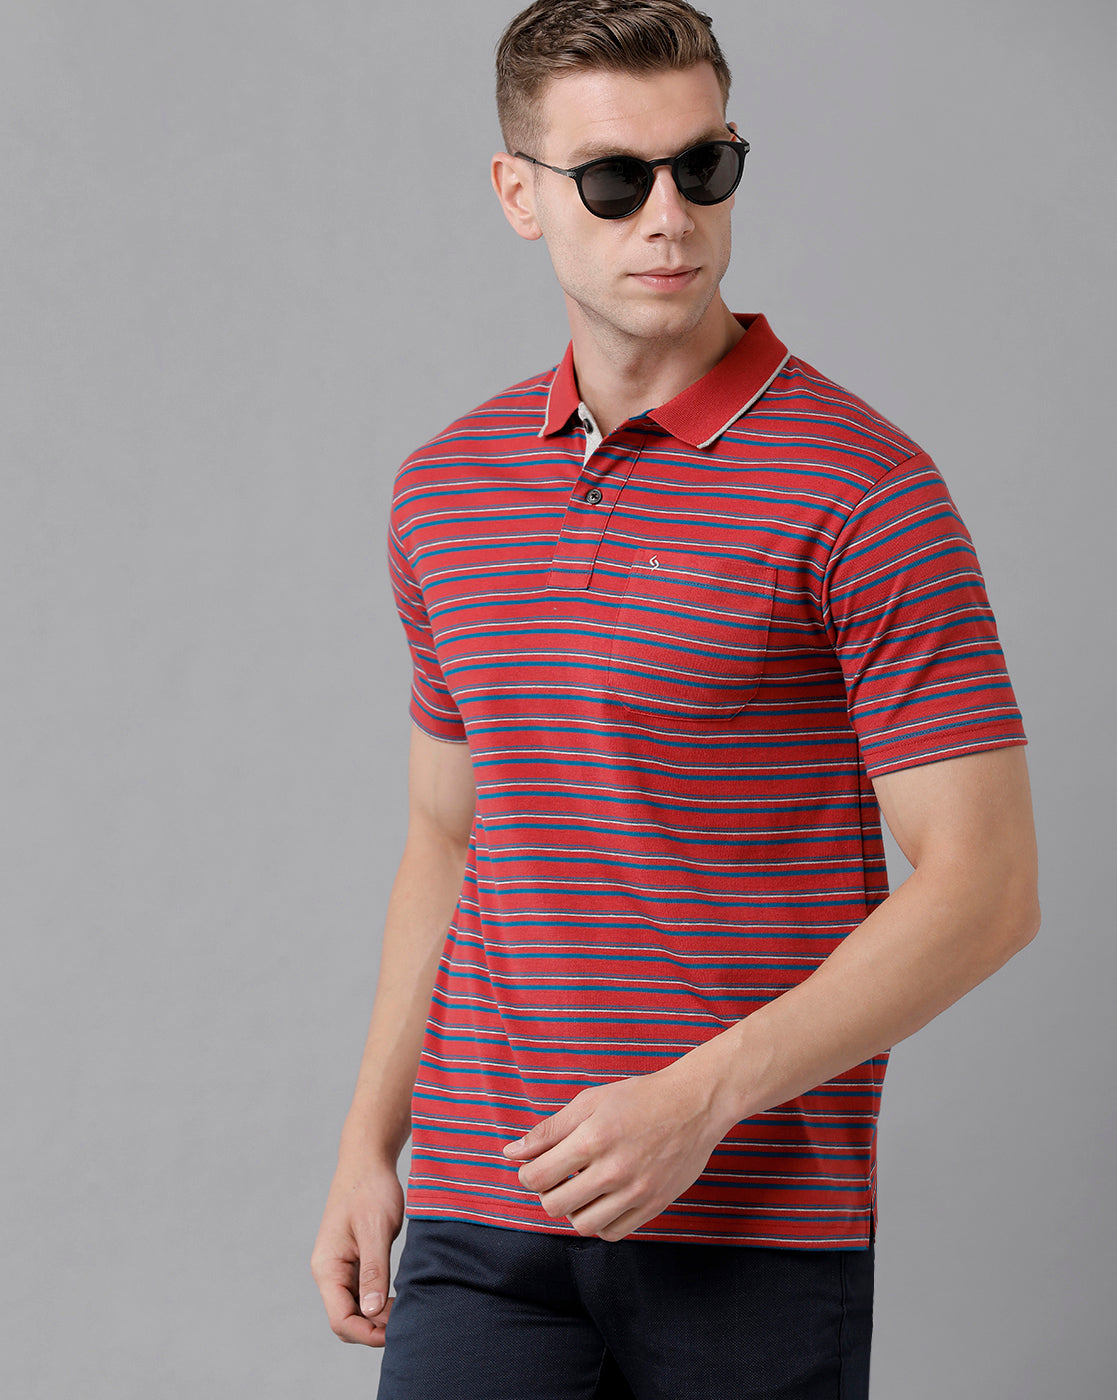 Classic Polo Men's Cotton Striped Half Sleeve Regular Fit Polo Neck Red Color T-Shirt | Feeders - 207 B